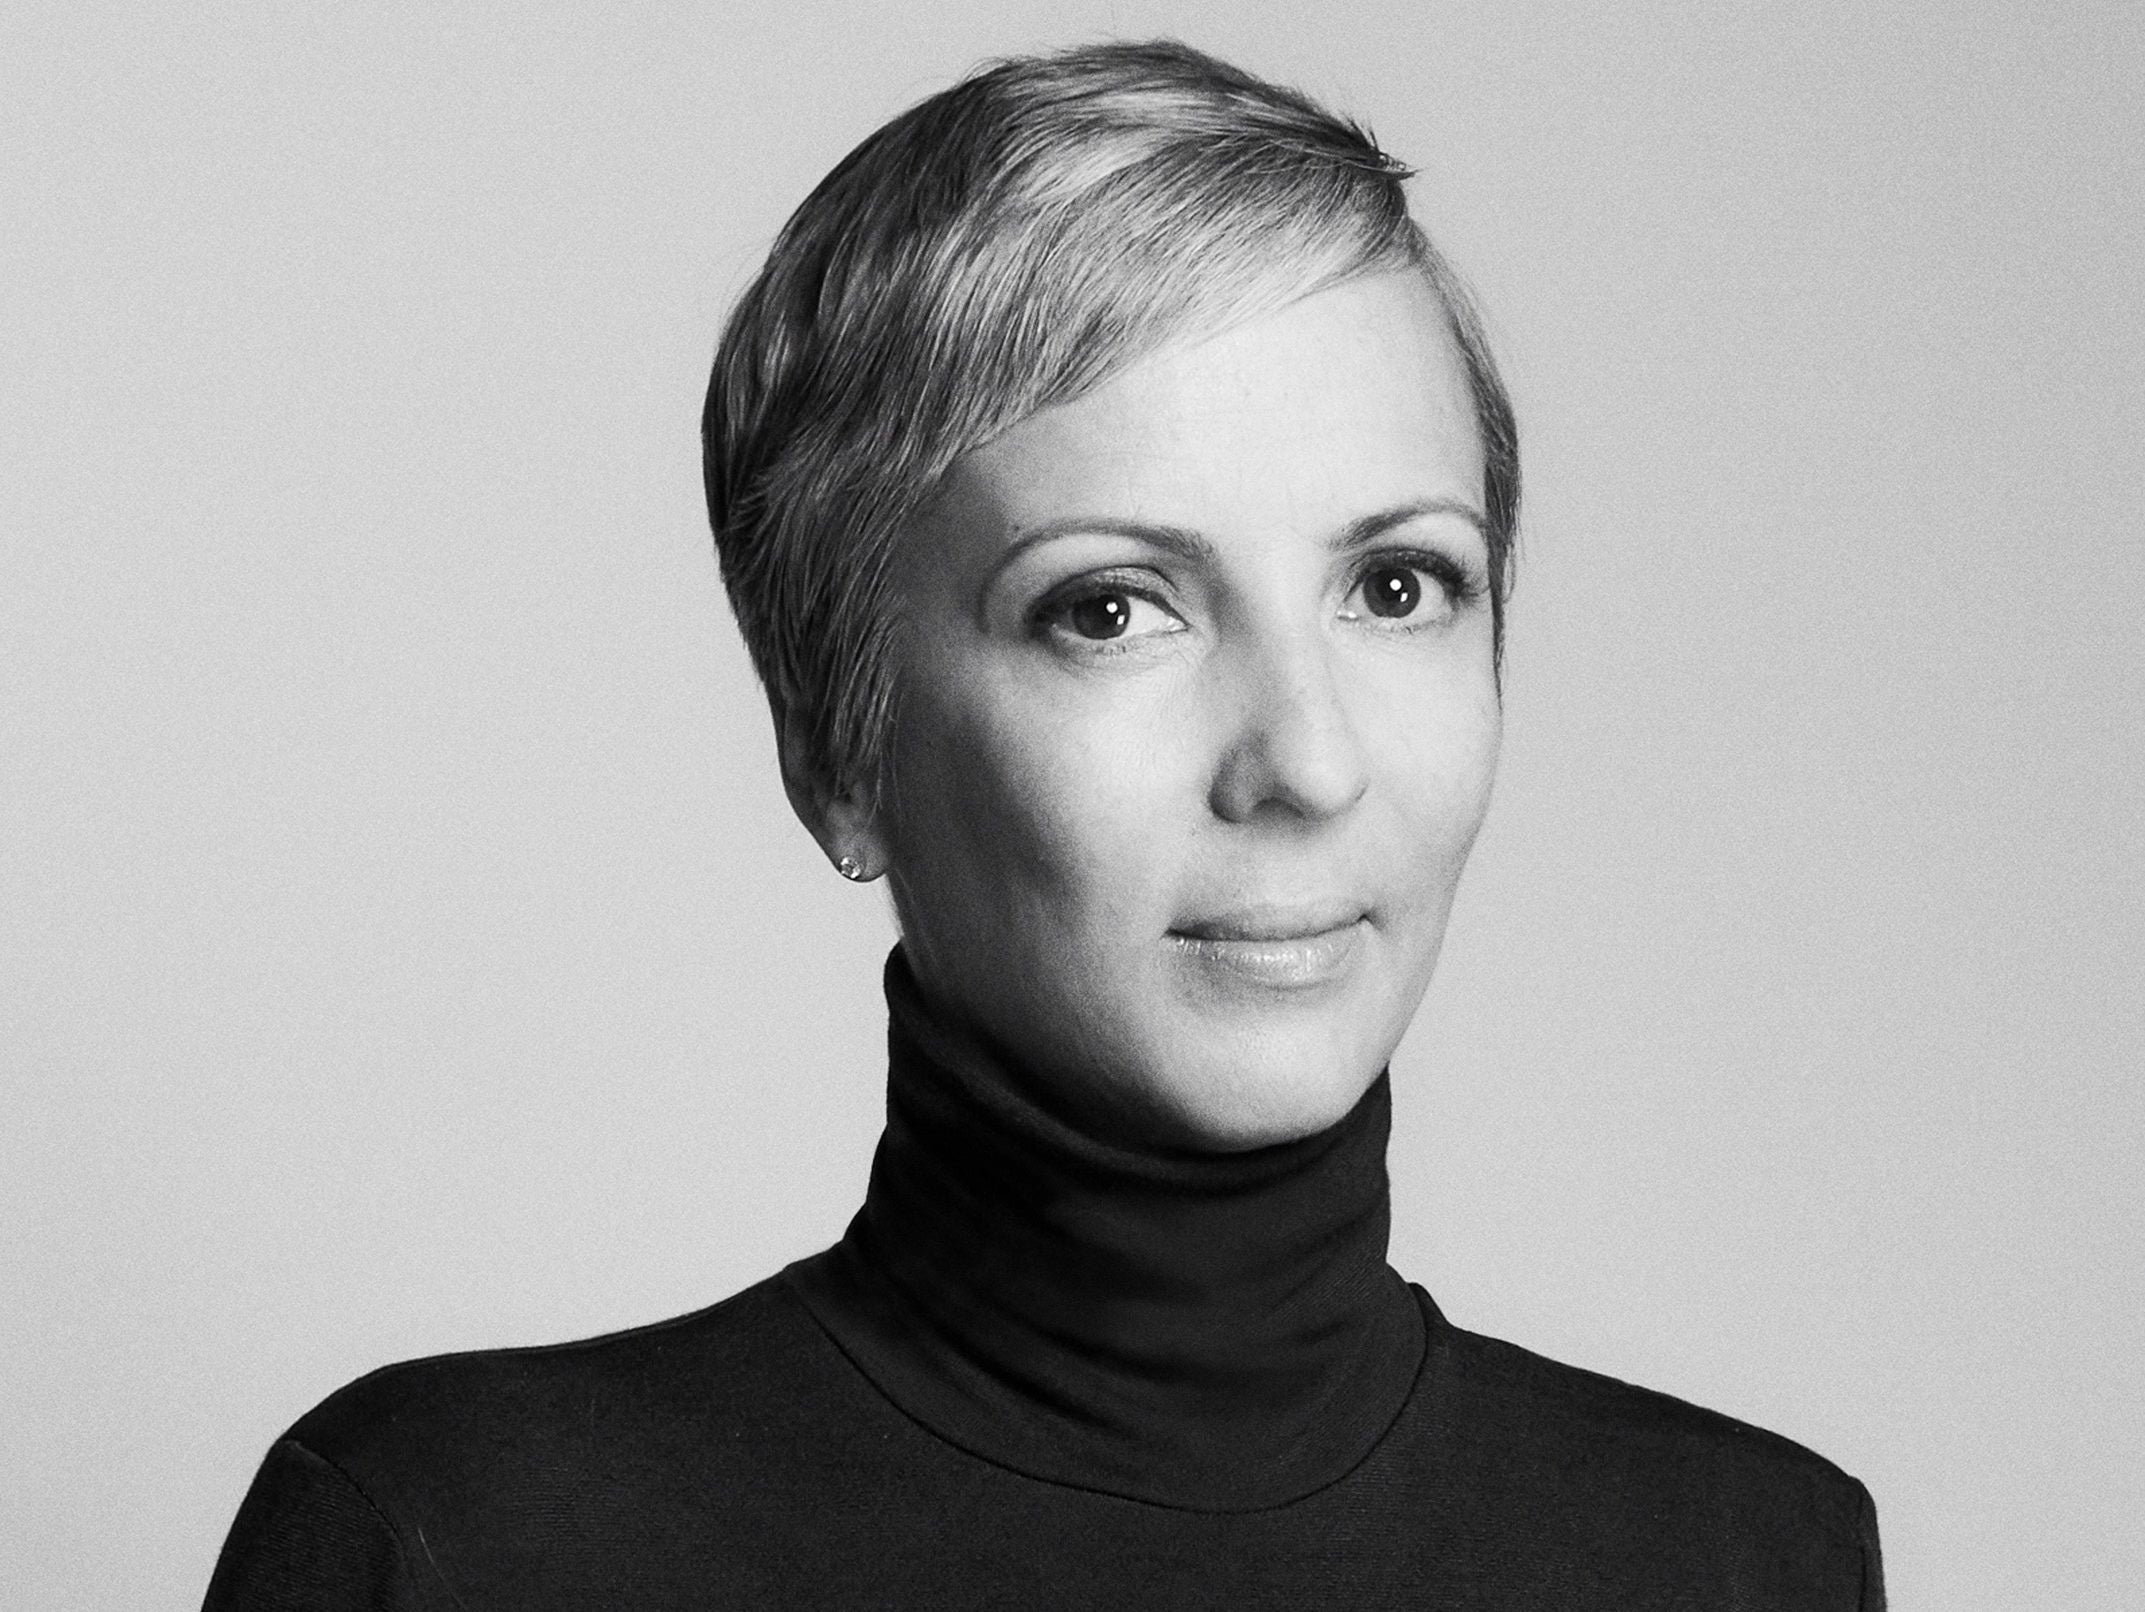 Elle magazine appoints Anne-Marie Curtis as new editor-in-chief, who says role is 'dream job'